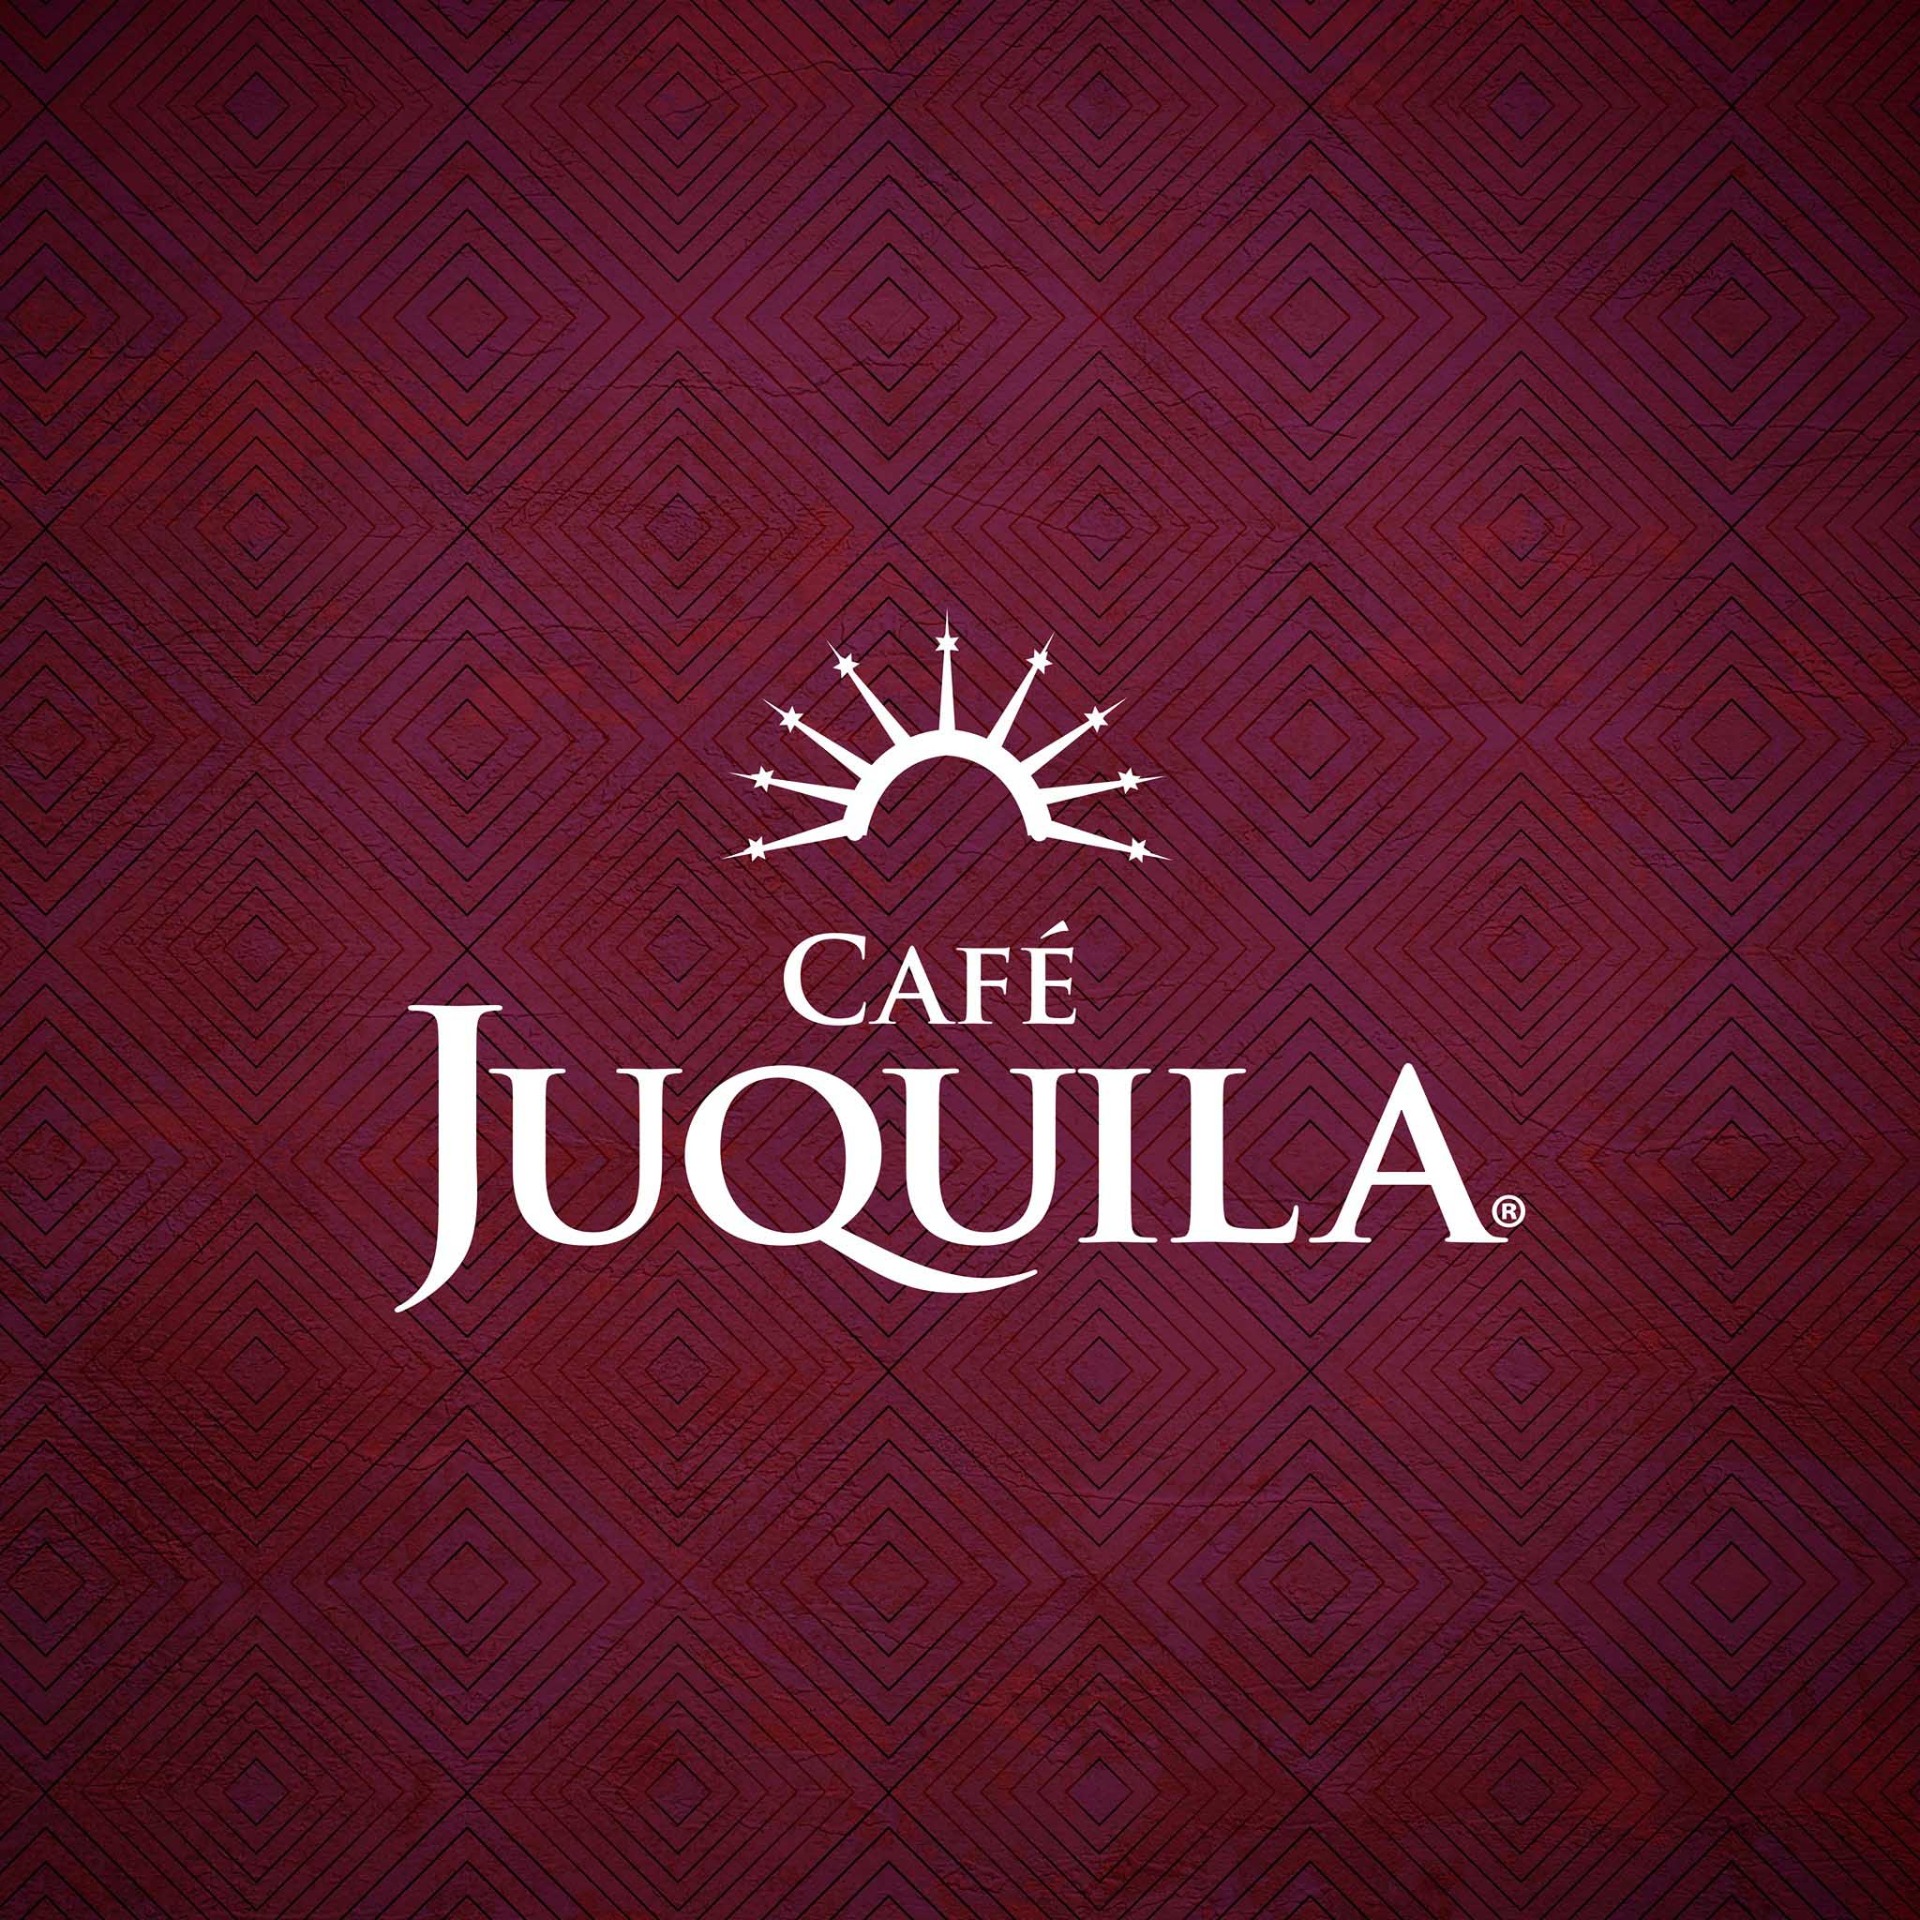 Cafe Juquila